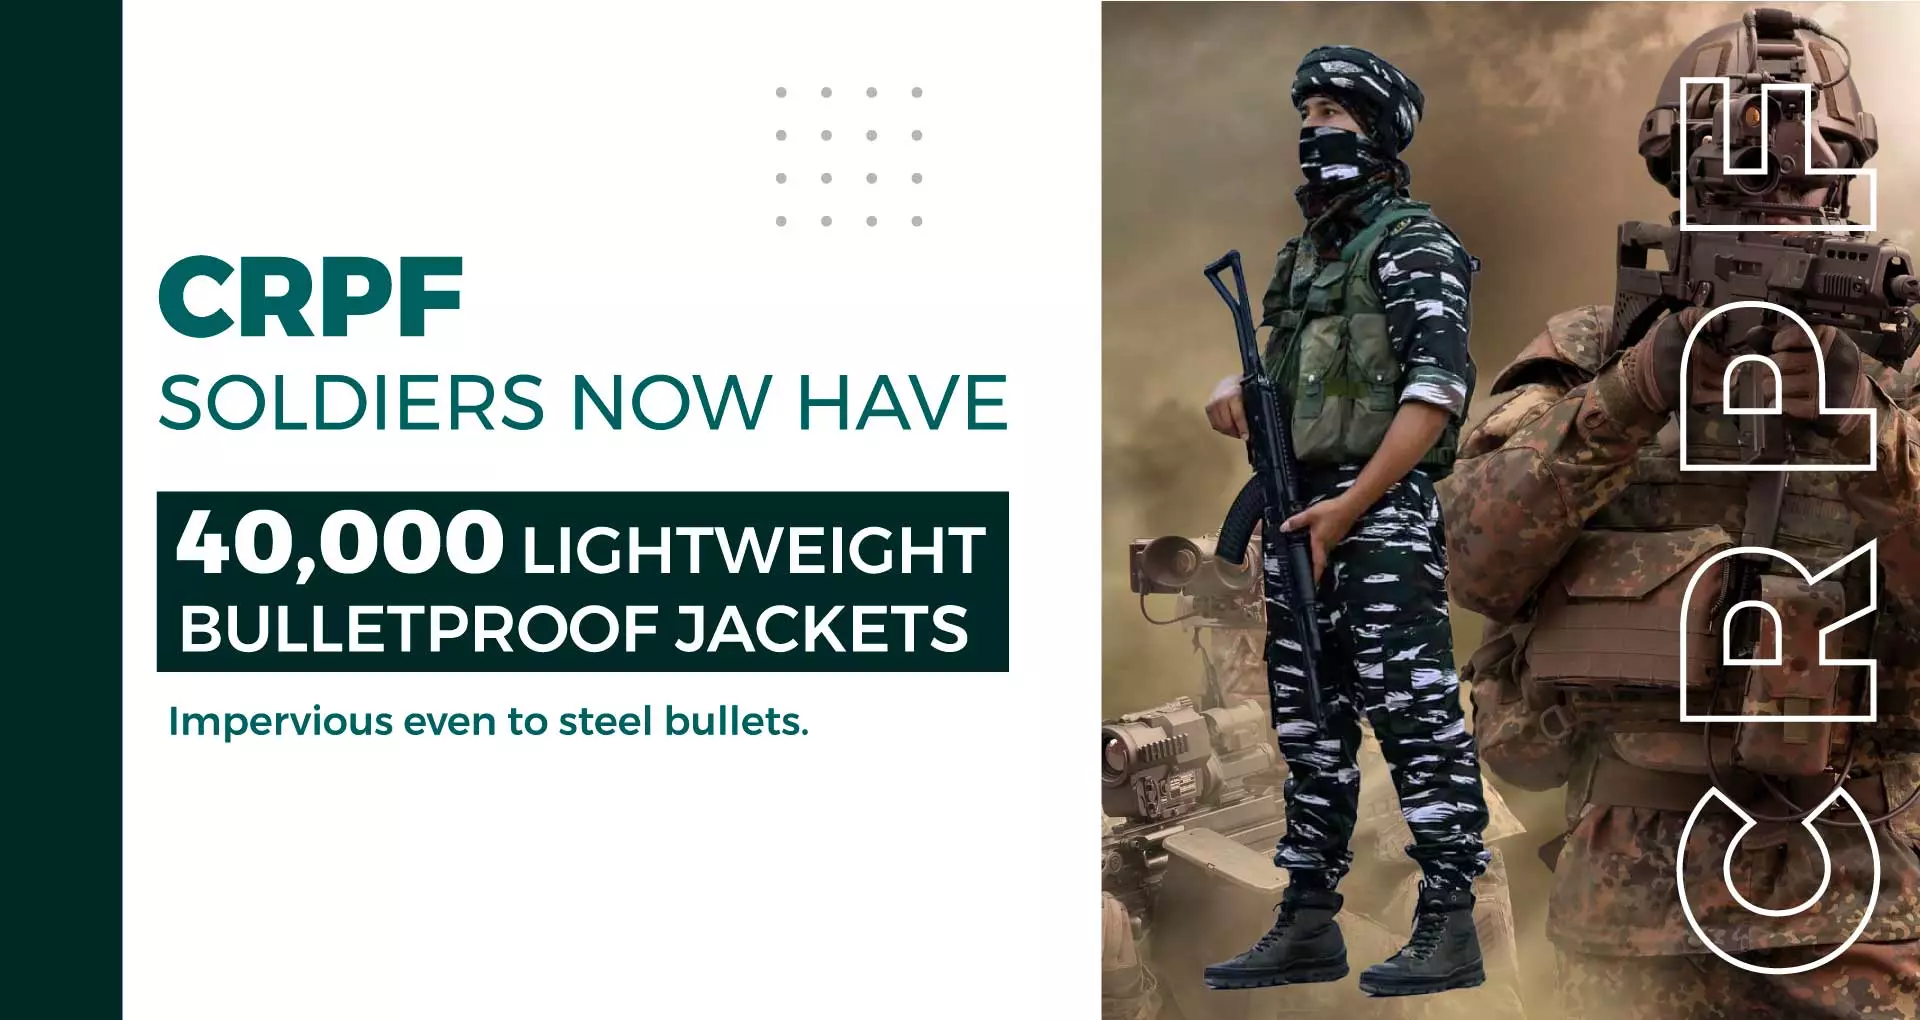 CRPF soldiers now have 40,000 light bulletproof jackets, impervious even to steel bullets.